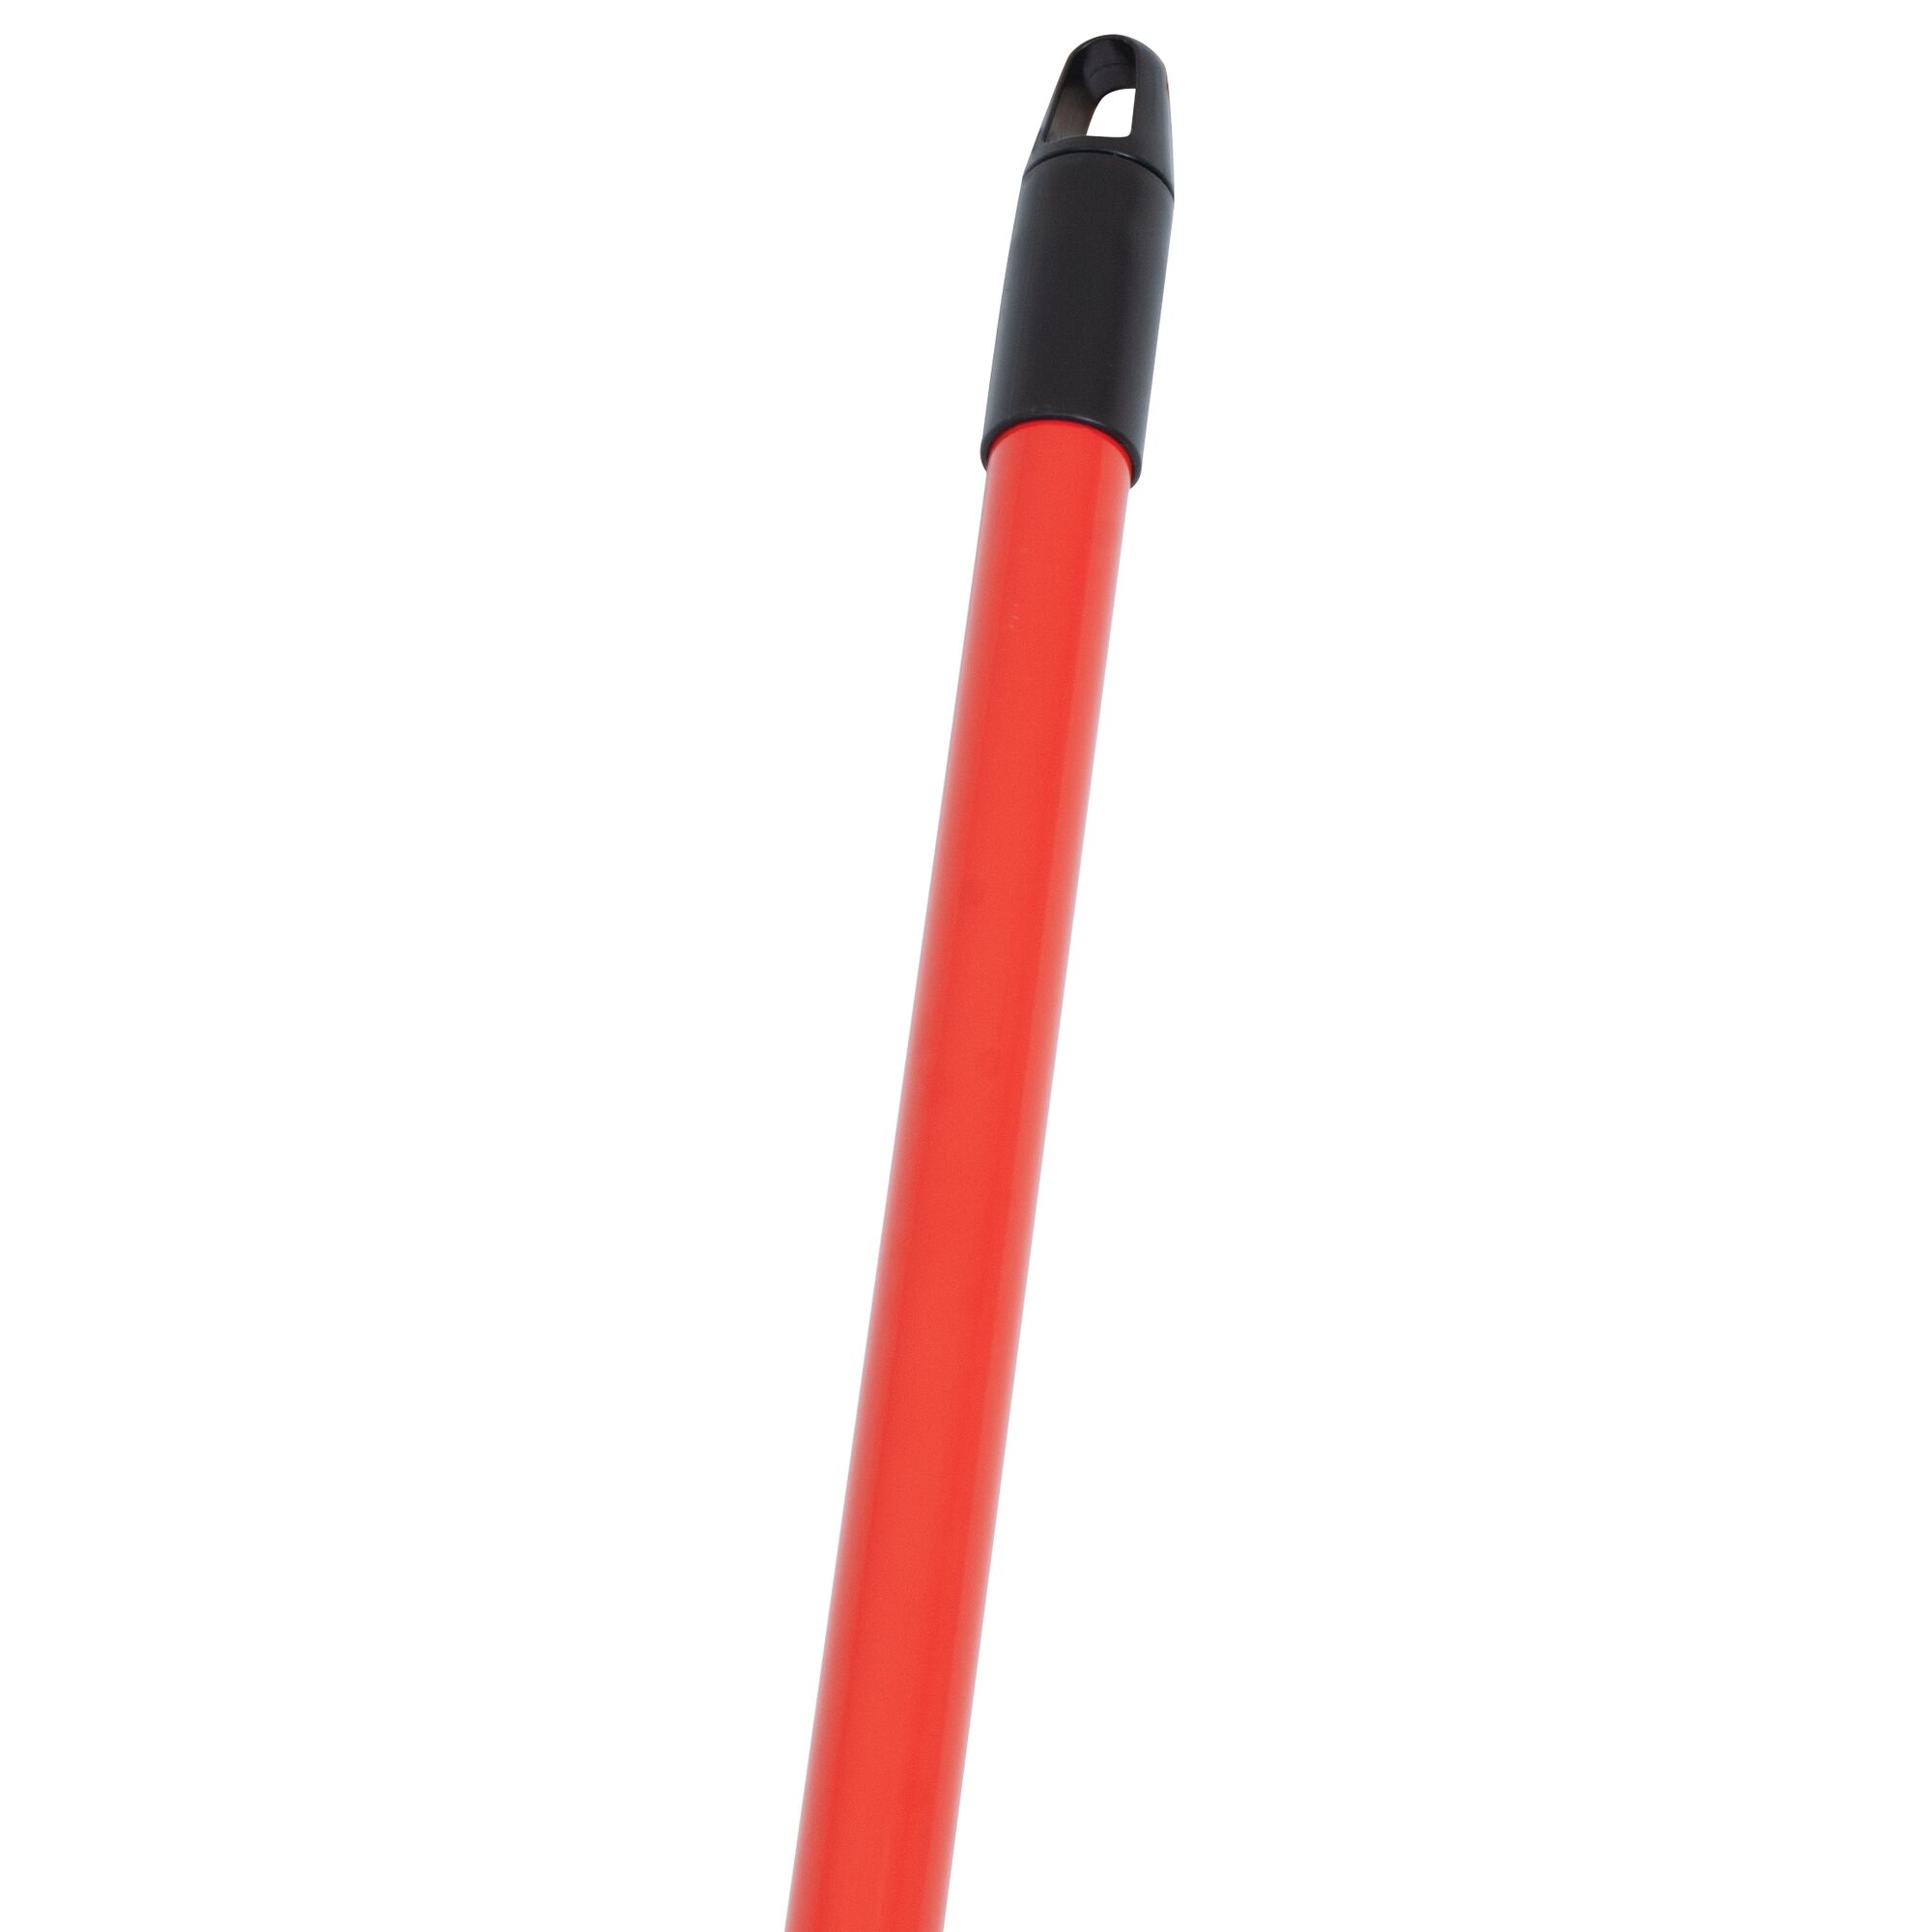 Comfortable grip feature of a 24 inch push broom with built in squeegee.